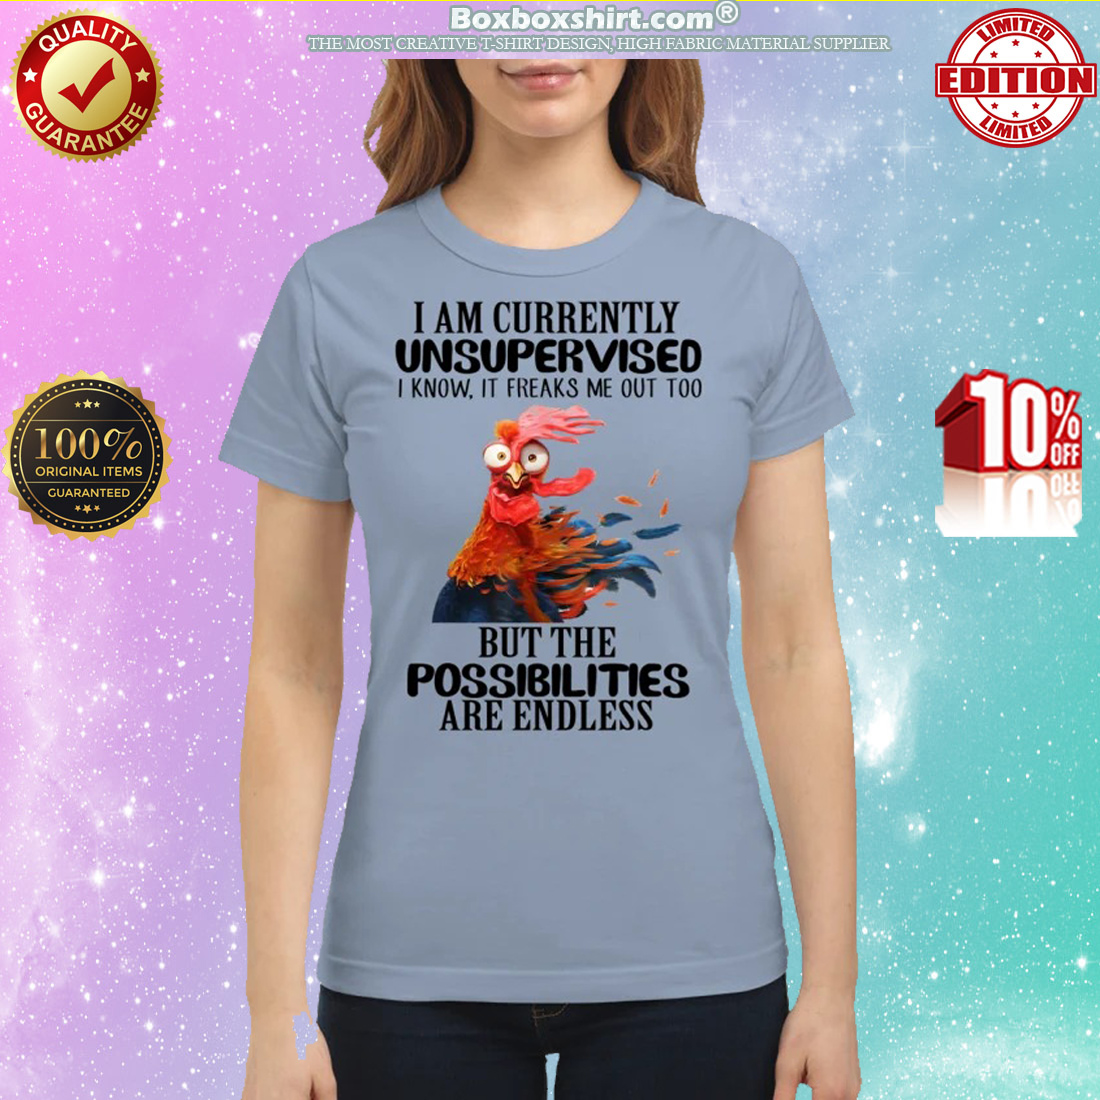 Chicken i am currently unsupervised but the possibilities are endless classic shirt